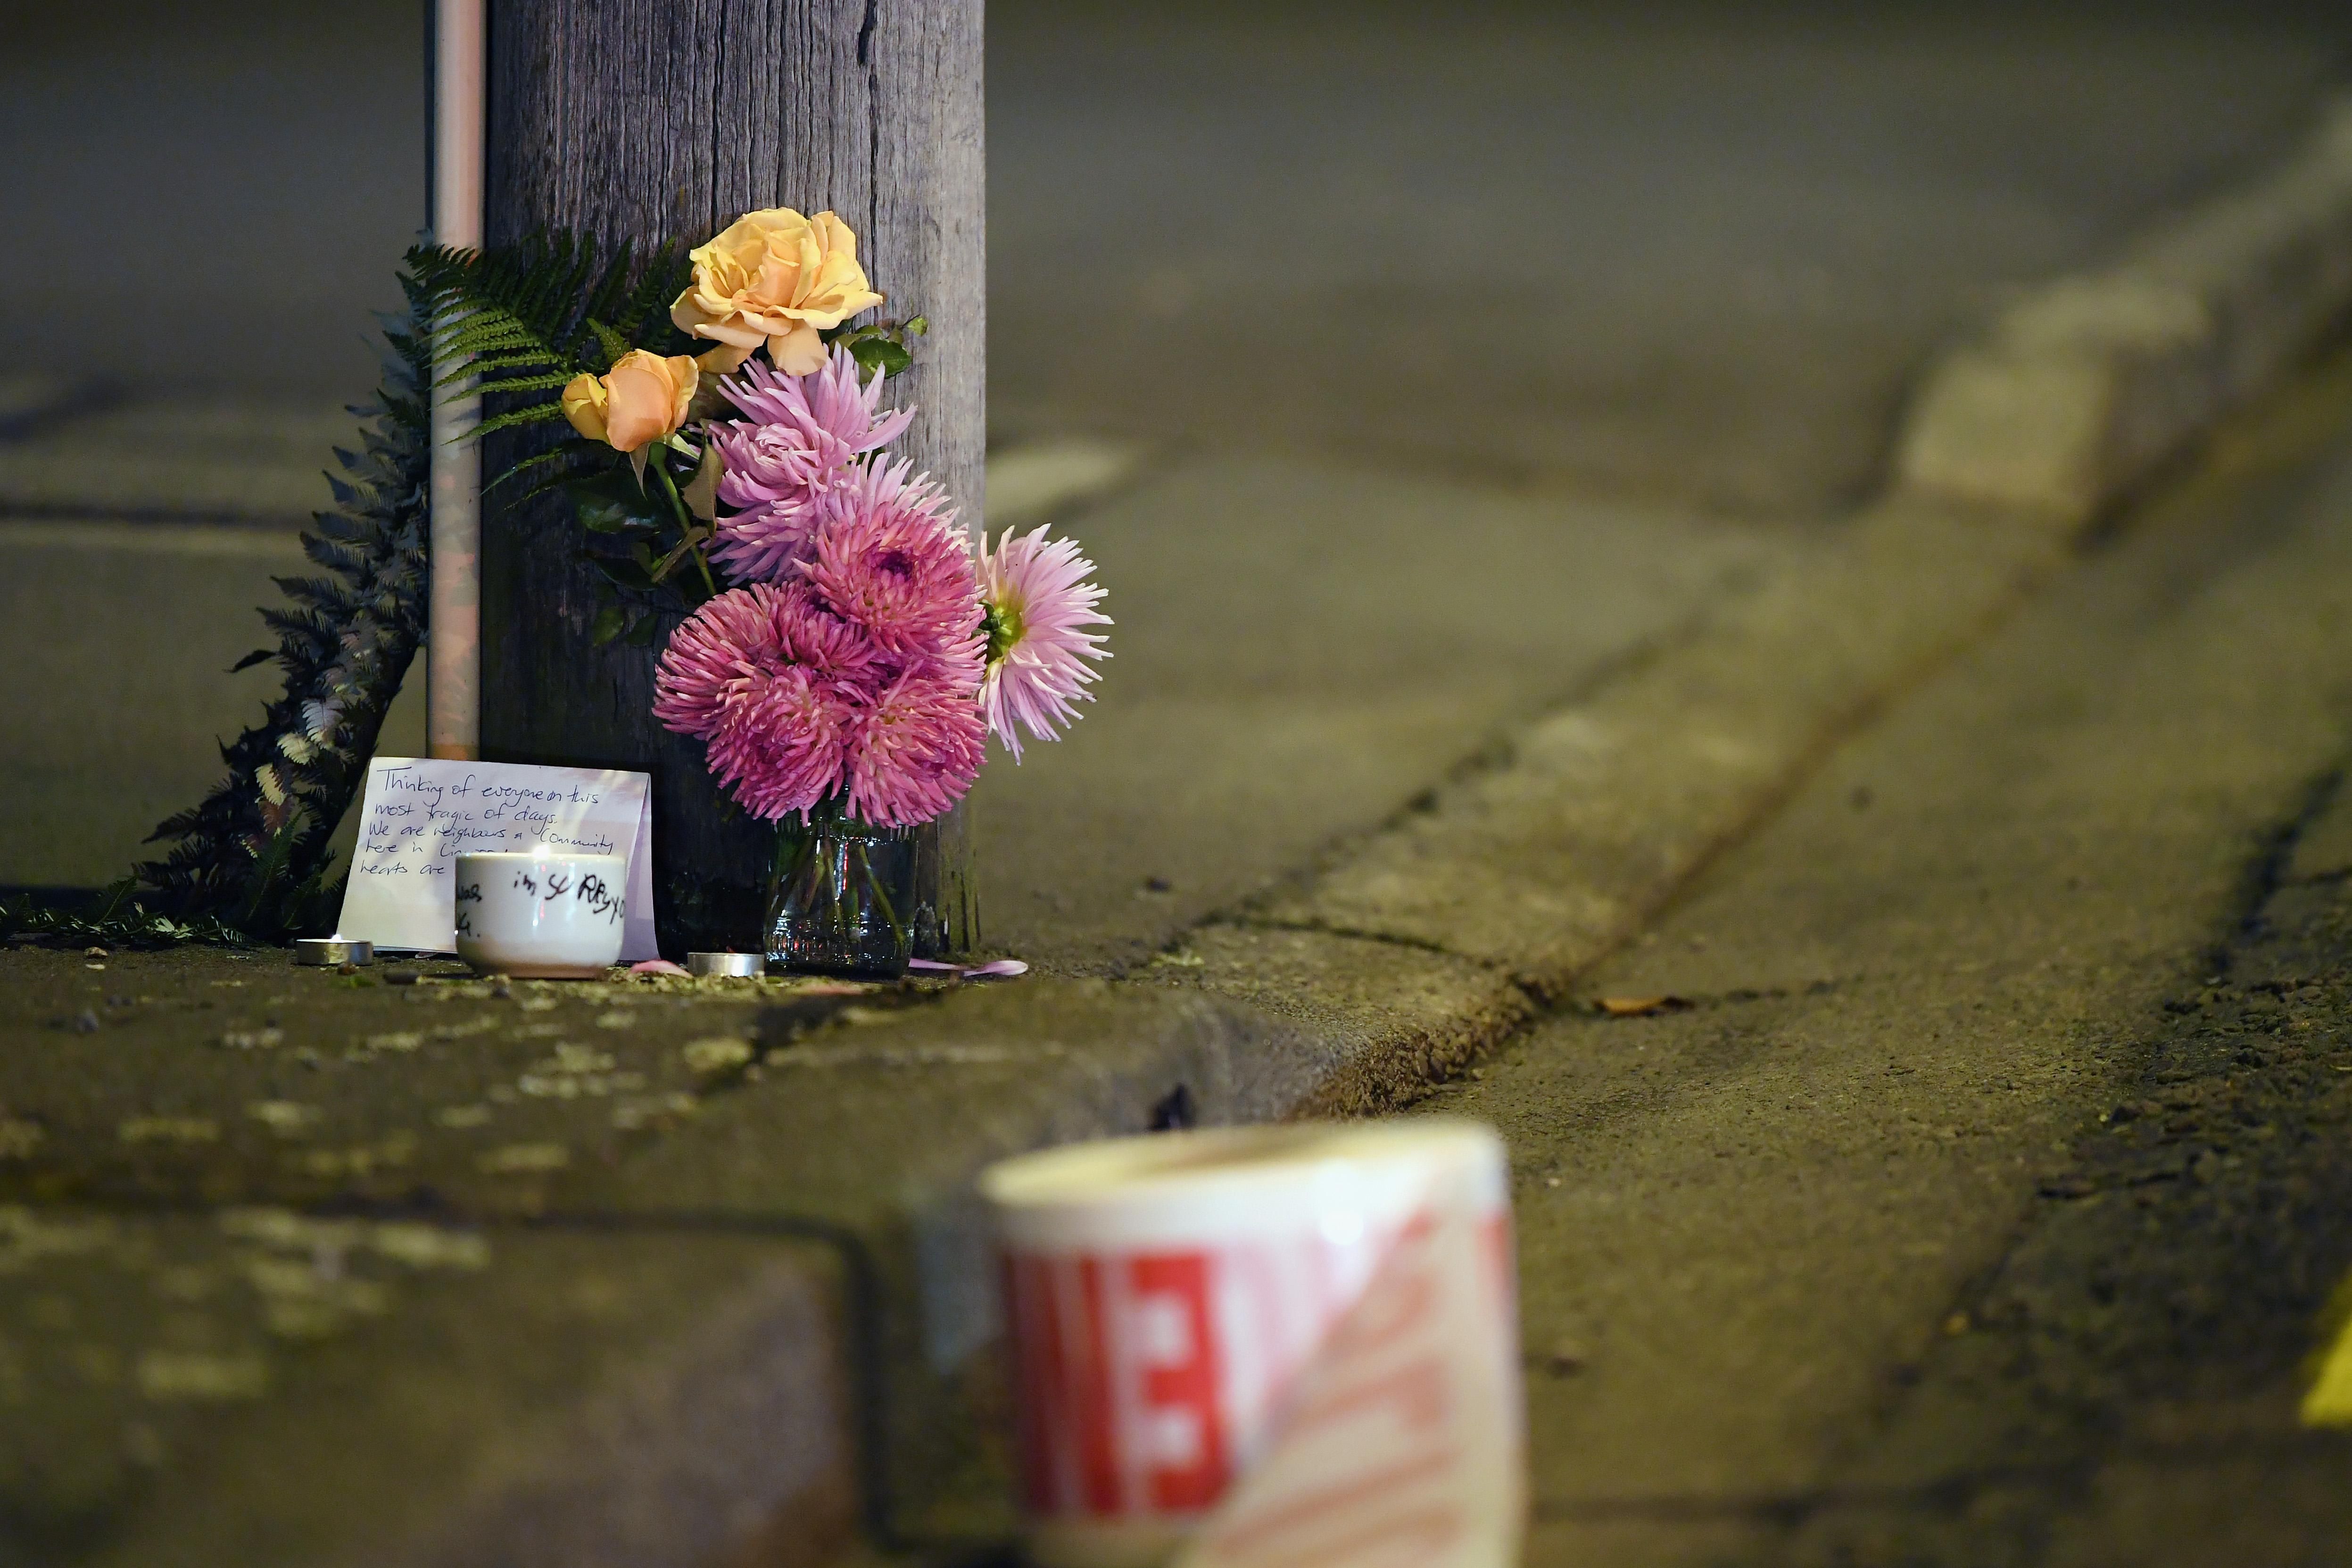 A floral tribute is seen on Linwood Avenue near the Linwood Masjid on March 15, 2019 in Christchurch, New Zealand. 49 people have been confirmed dead and more than 20 are injured following attacks at two mosques in Christchurch. Four people are in custody following shootings at Al Noor mosque on Dean's Road and the Linwood Masjid in Christchurch. Mosques across New Zealand have been closed and police are urging people not to attend Friday prayers as a safety precaution. (Photo by Kai Schwoerer/Getty Images)